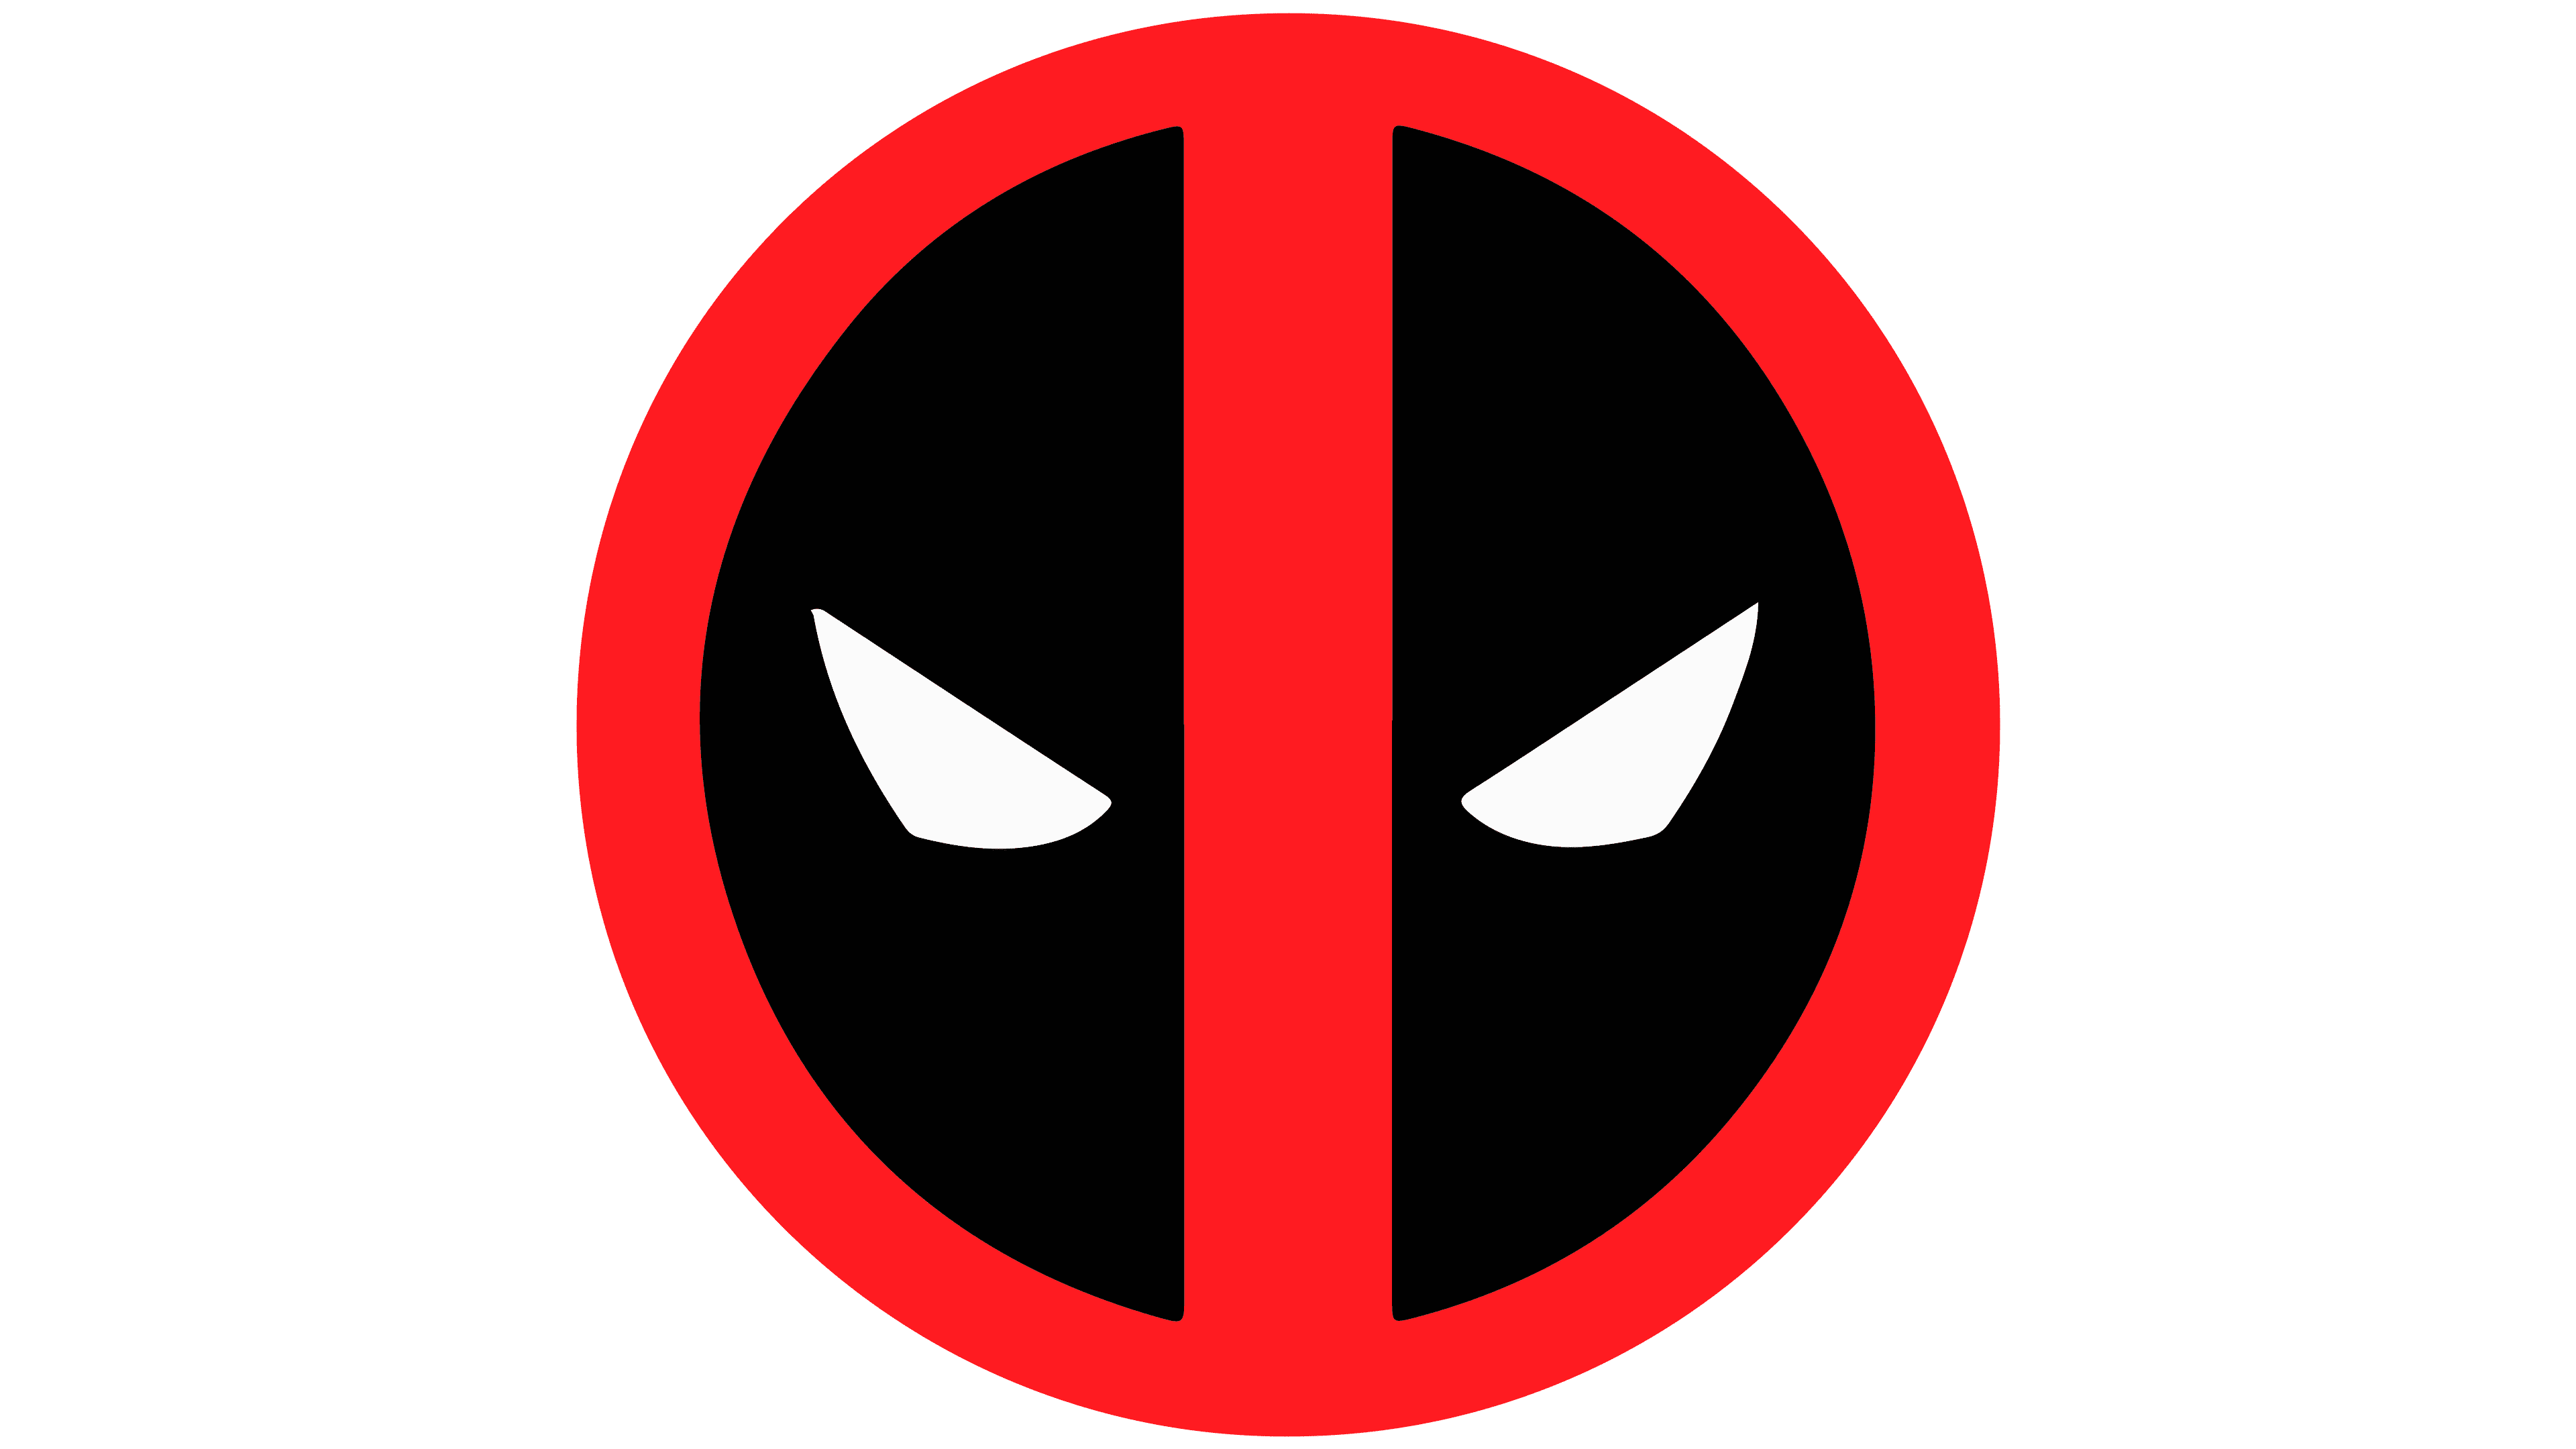 How to draw Deadpool Logo easy step by step - YouTube